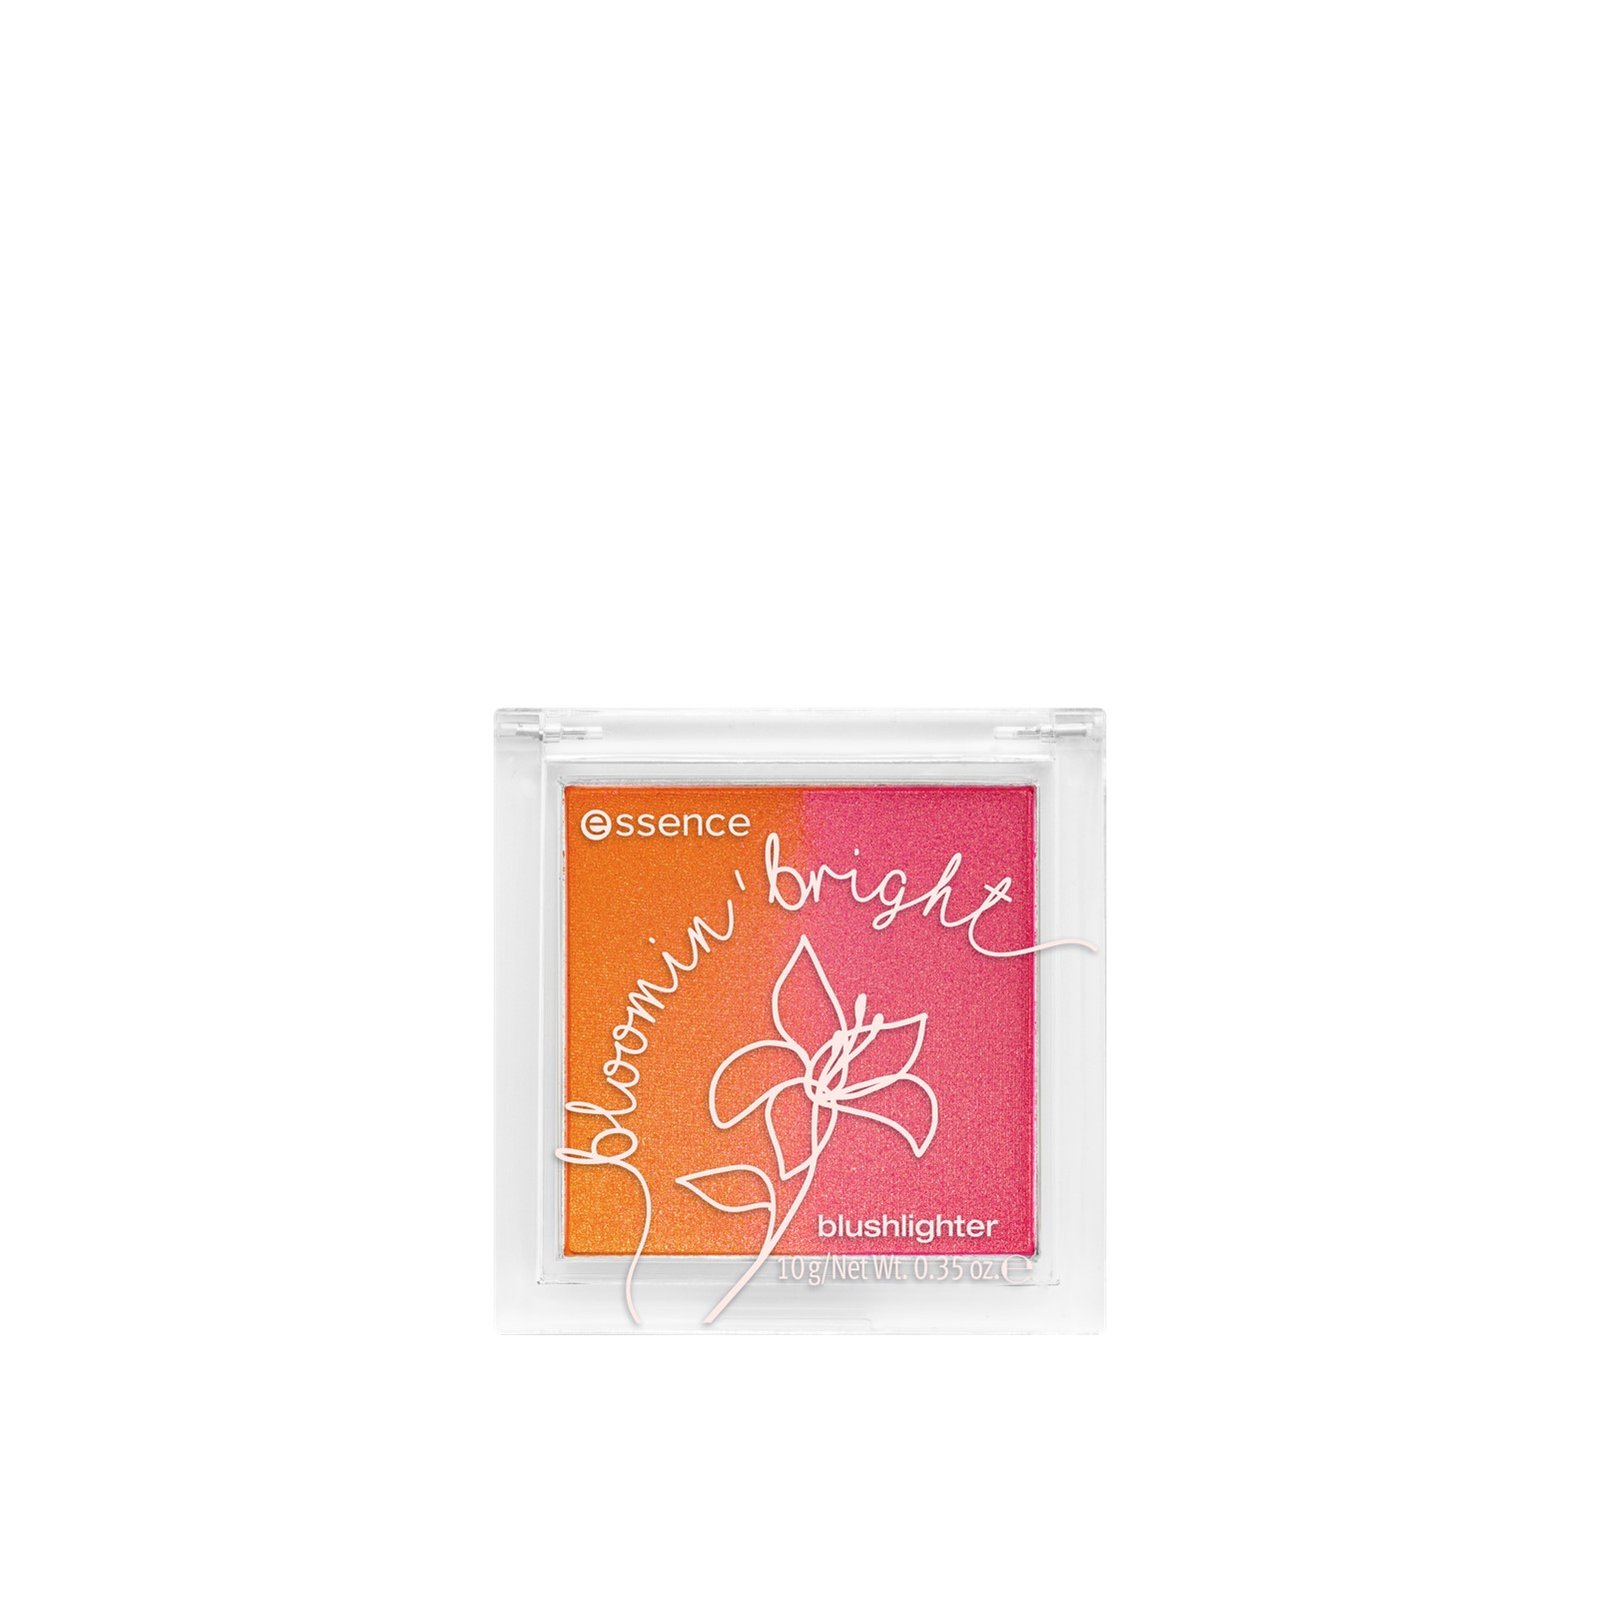 essence Bloomin' Bright Blushlighter 01 Bloom With Me! 10g (0.35 oz)